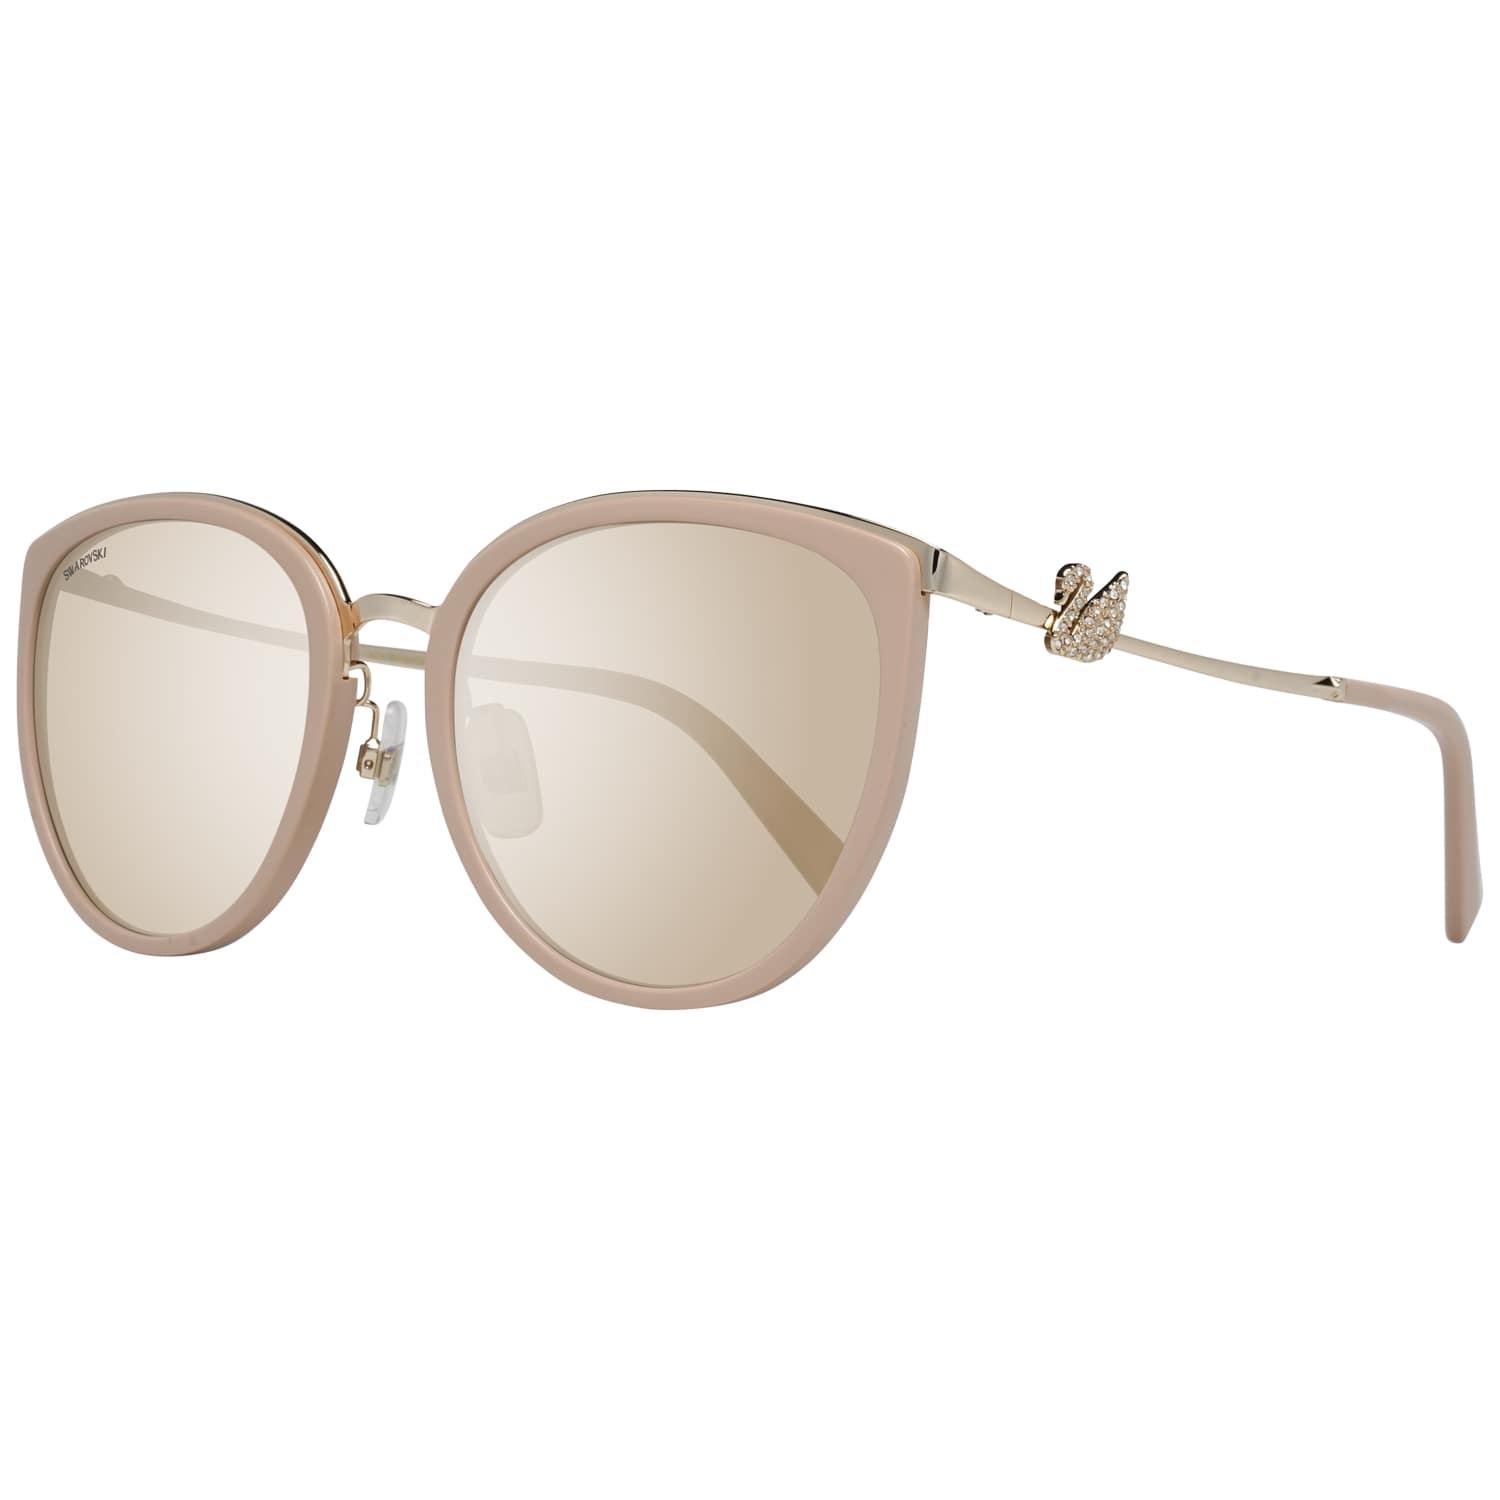 DetailsMATERIAL: MetalCOLOR: GoldMODEL: SK0247-K 6032GGENDER: WomenCOUNTRY OF MANUFACTURE: ChinaTYPE: SunglassesORIGINAL CASE?: YesSTYLE: ButterflyOCCASION: CasualFEATURES: LightweightLENS COLOR: BrownLENS TECHNOLOGY: MirroredYEAR MANUFACTURED: